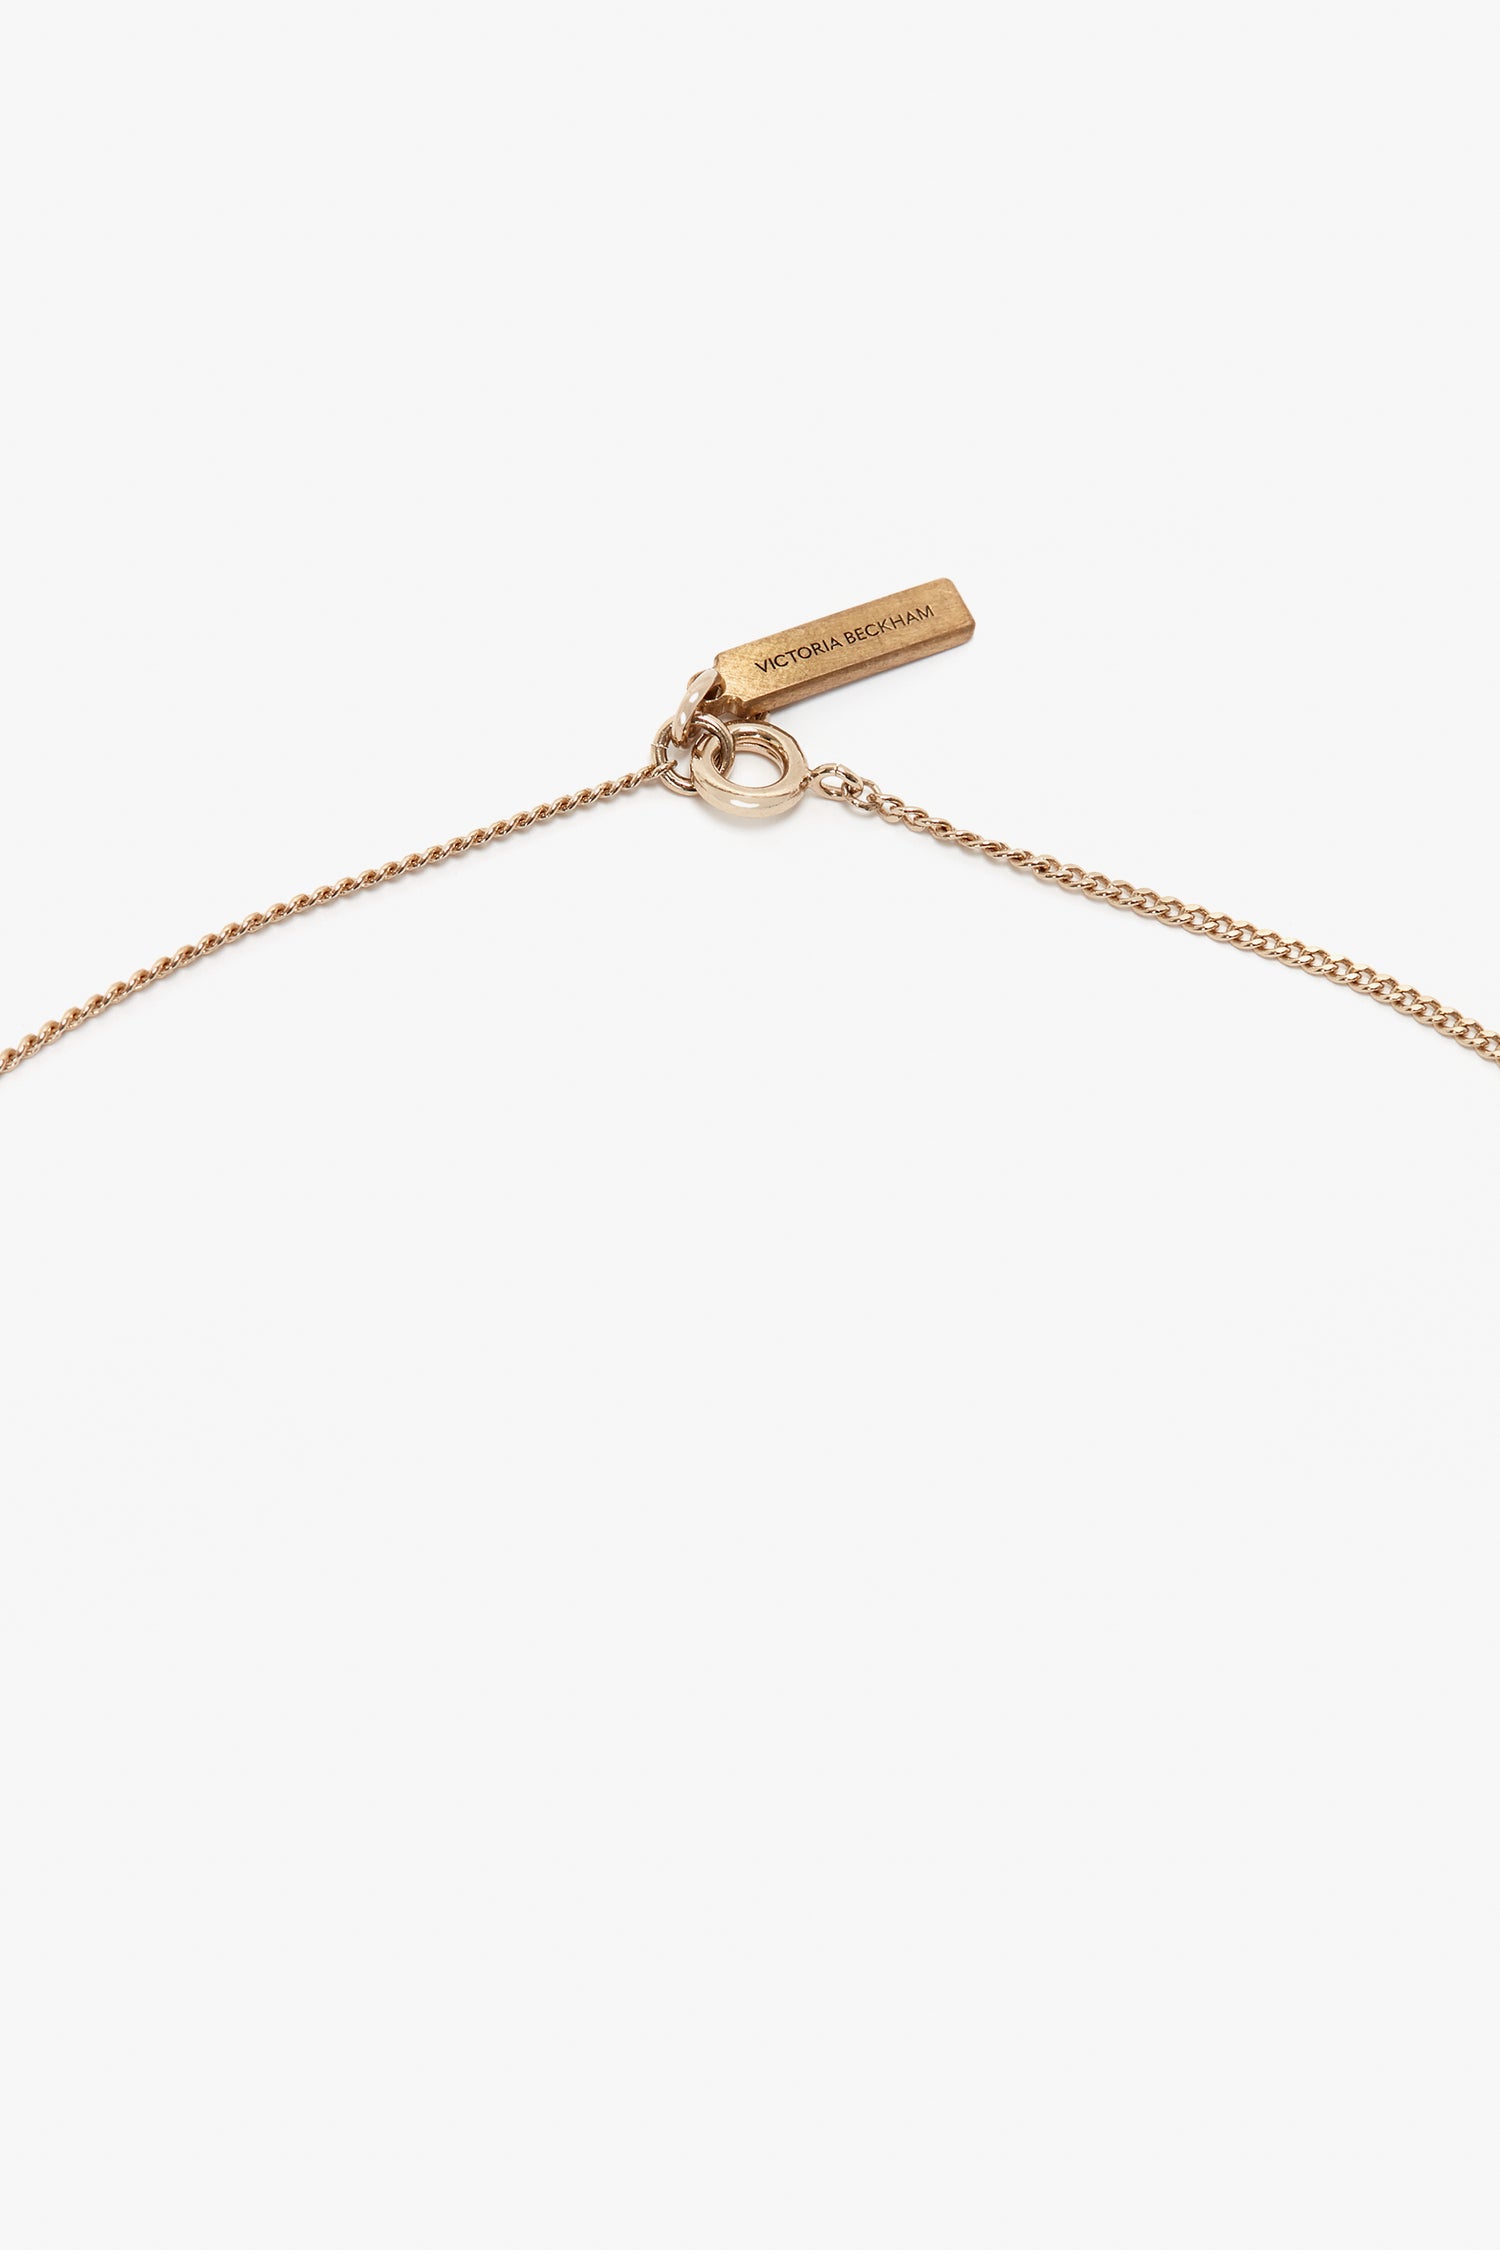 A delicate Exclusive Camellia Flower Necklace In Gold with a small rectangular tag reading "Victoria Beckham," handcrafted in Italy.